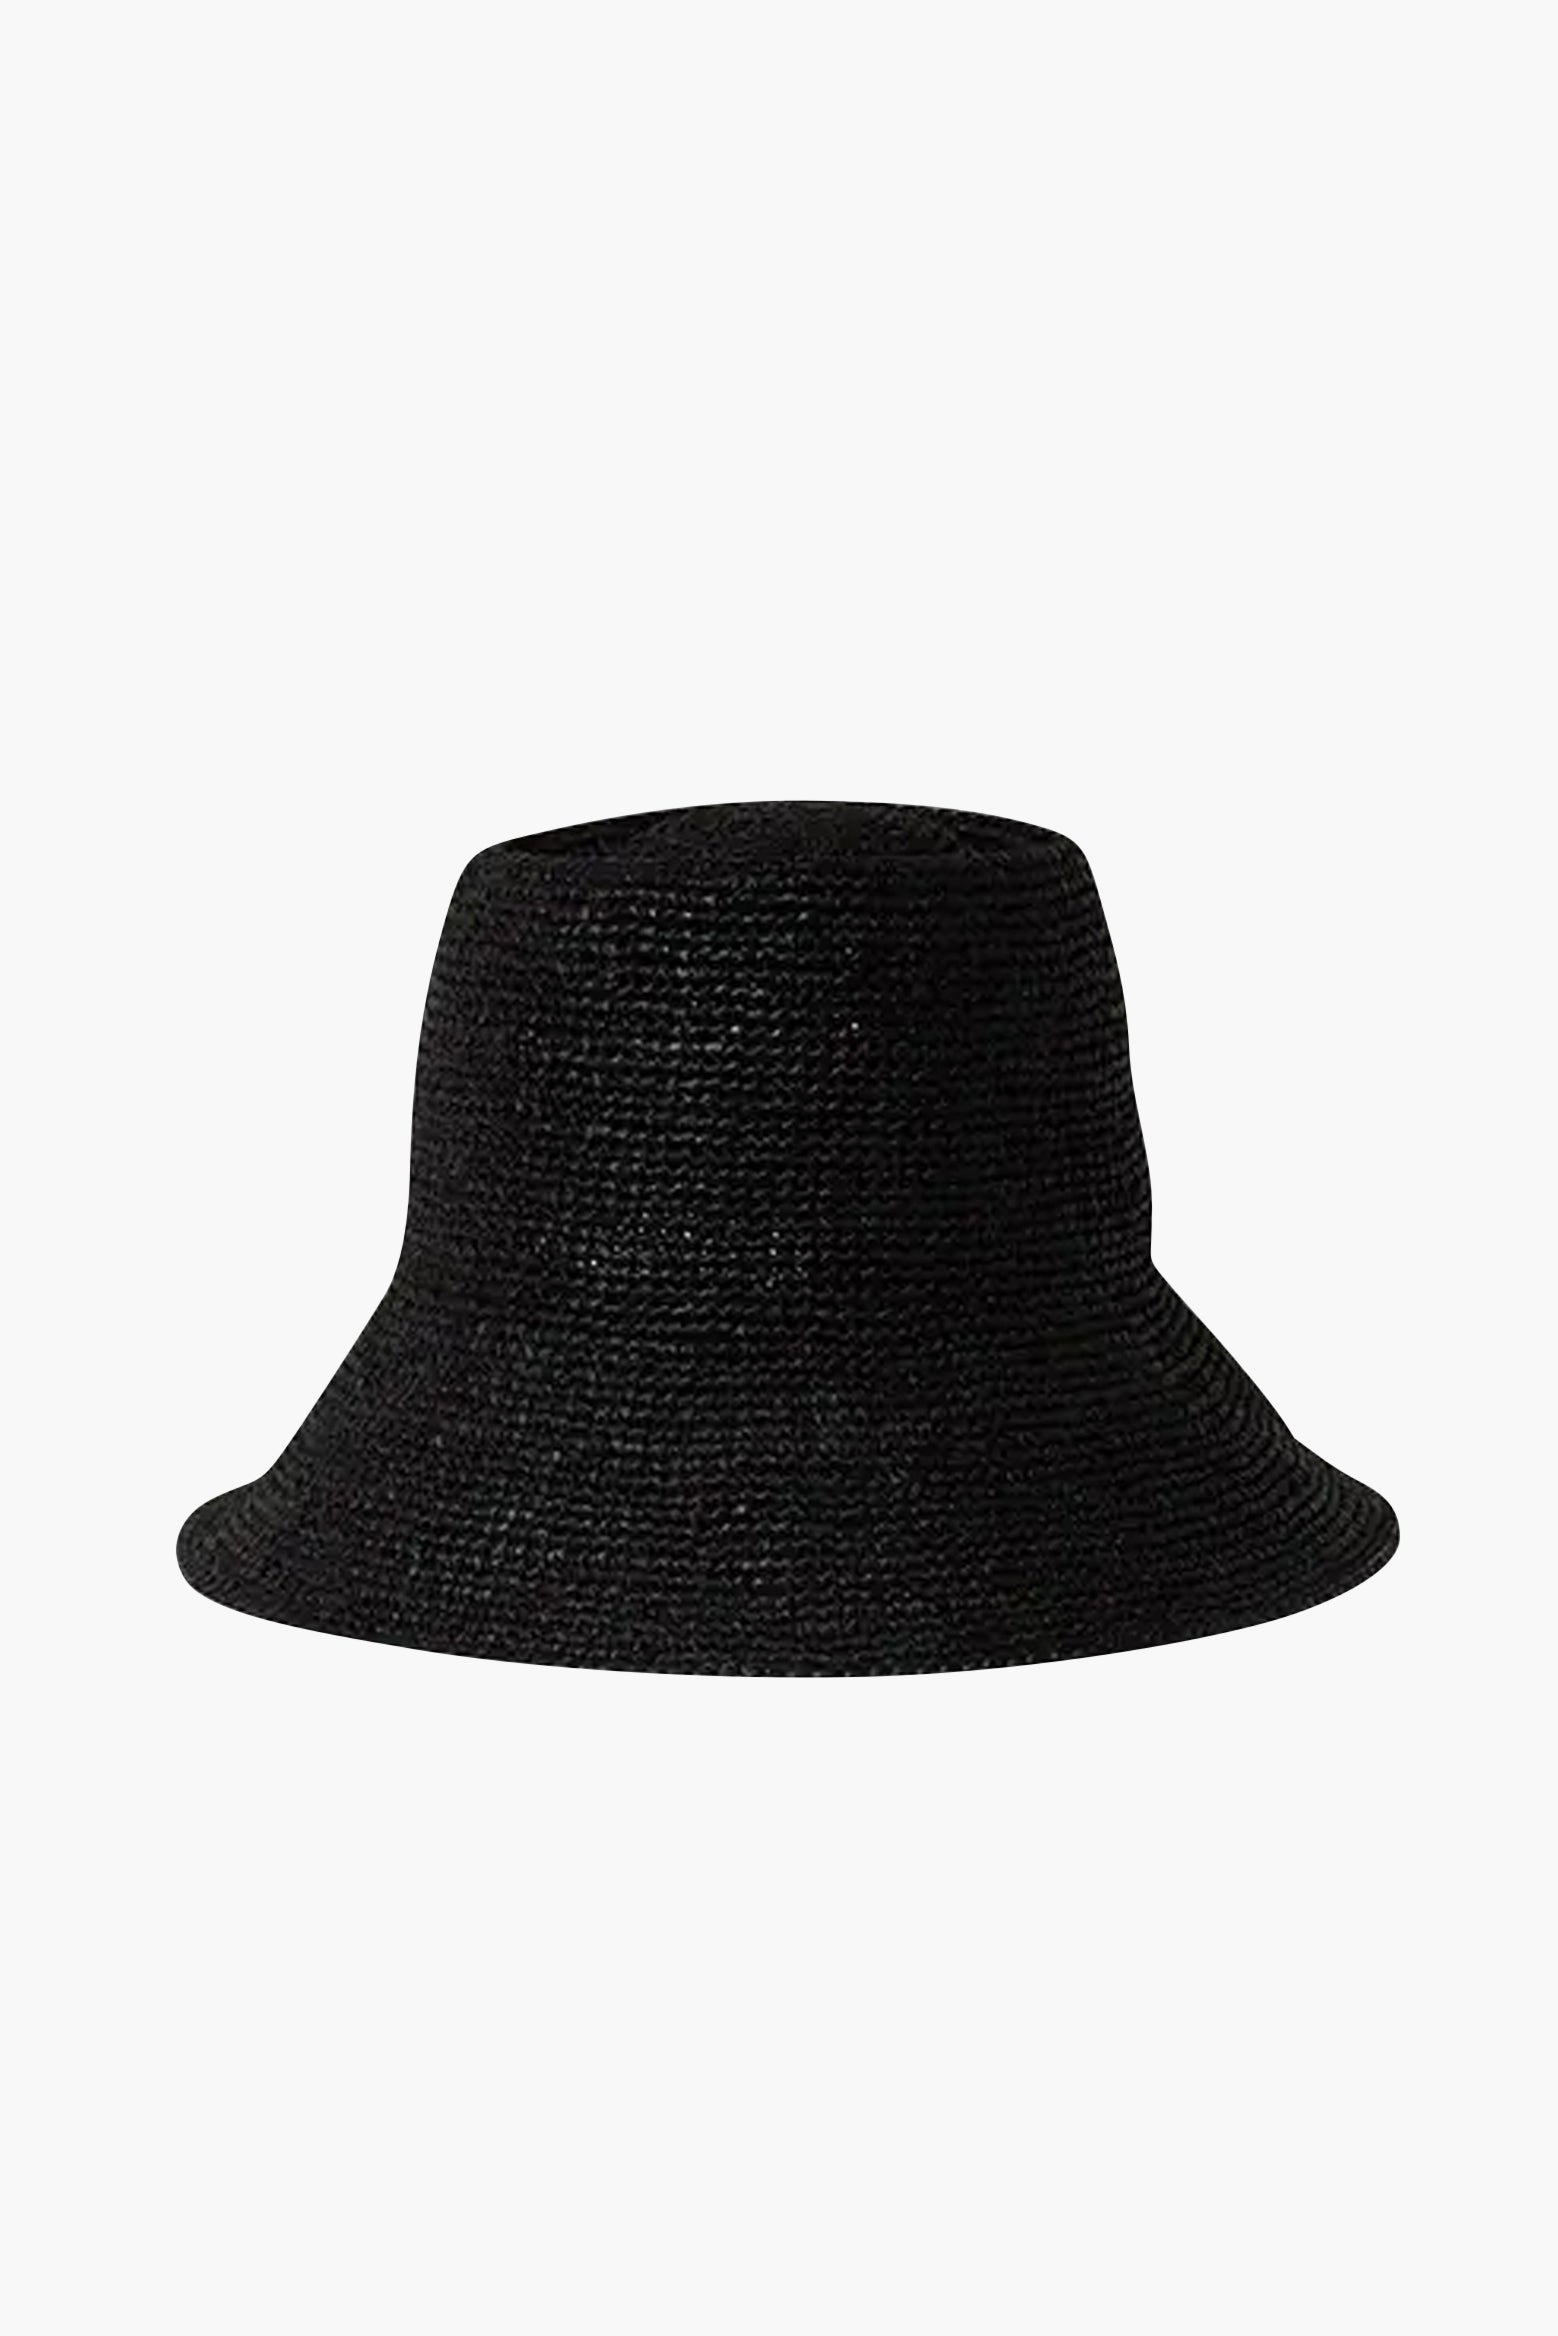 Janessa Leone Felix Bucket Hat in Black available at TNT The New Trend Australia.